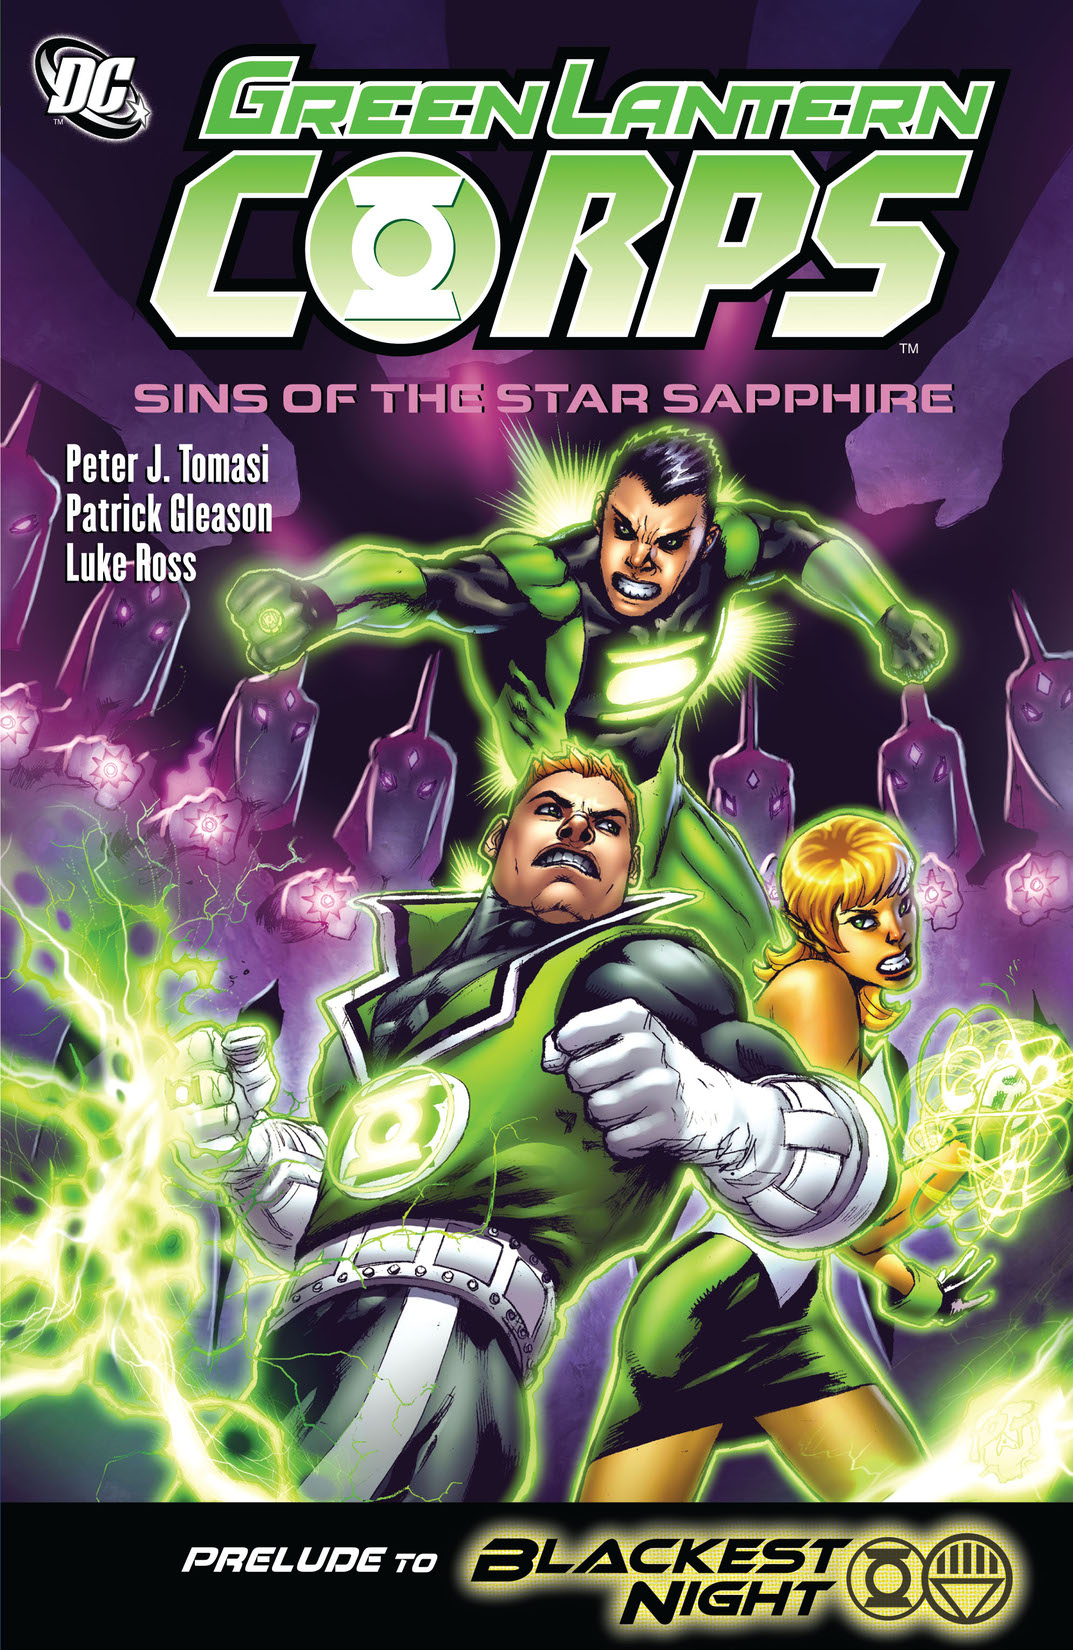 Green Lantern Corps: Sins of the Star Sapphire preview images